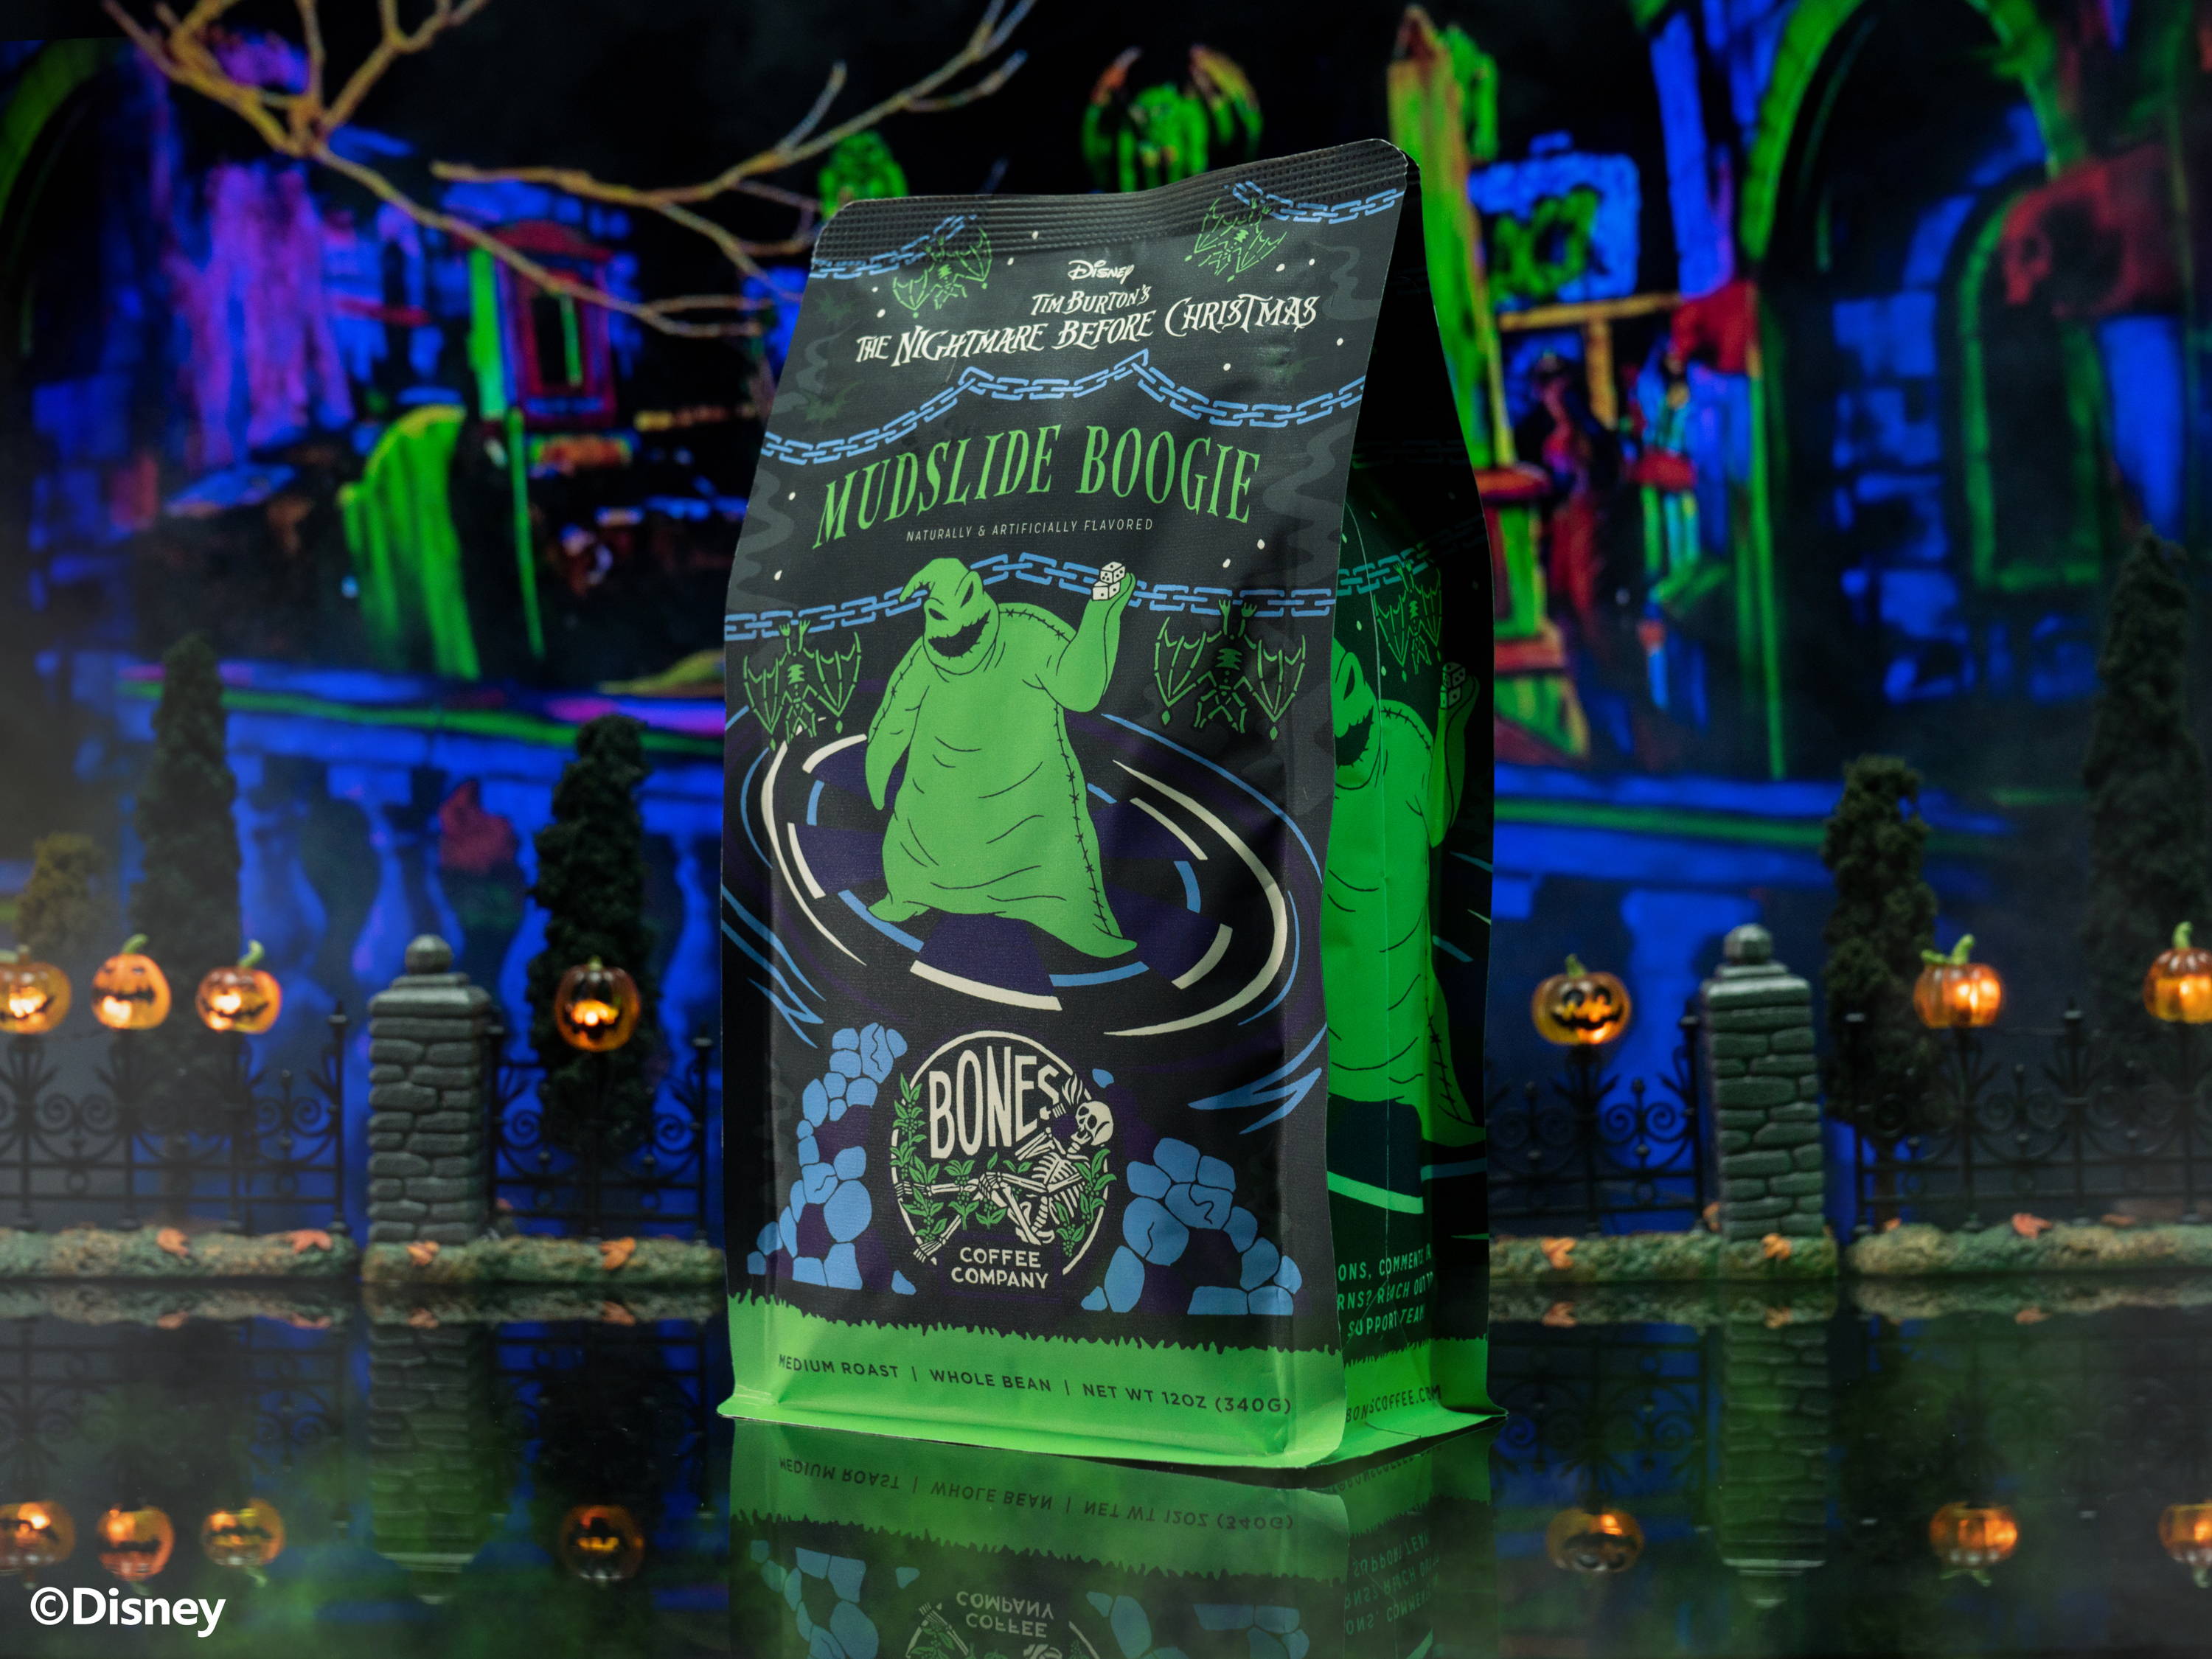 A 12 ounce bag of Bones Coffee Company Mudslide Boogie coffee. Its flavor is mudslide and it has Oogie Boogie on the art. The bag is inside a toy graveyard.